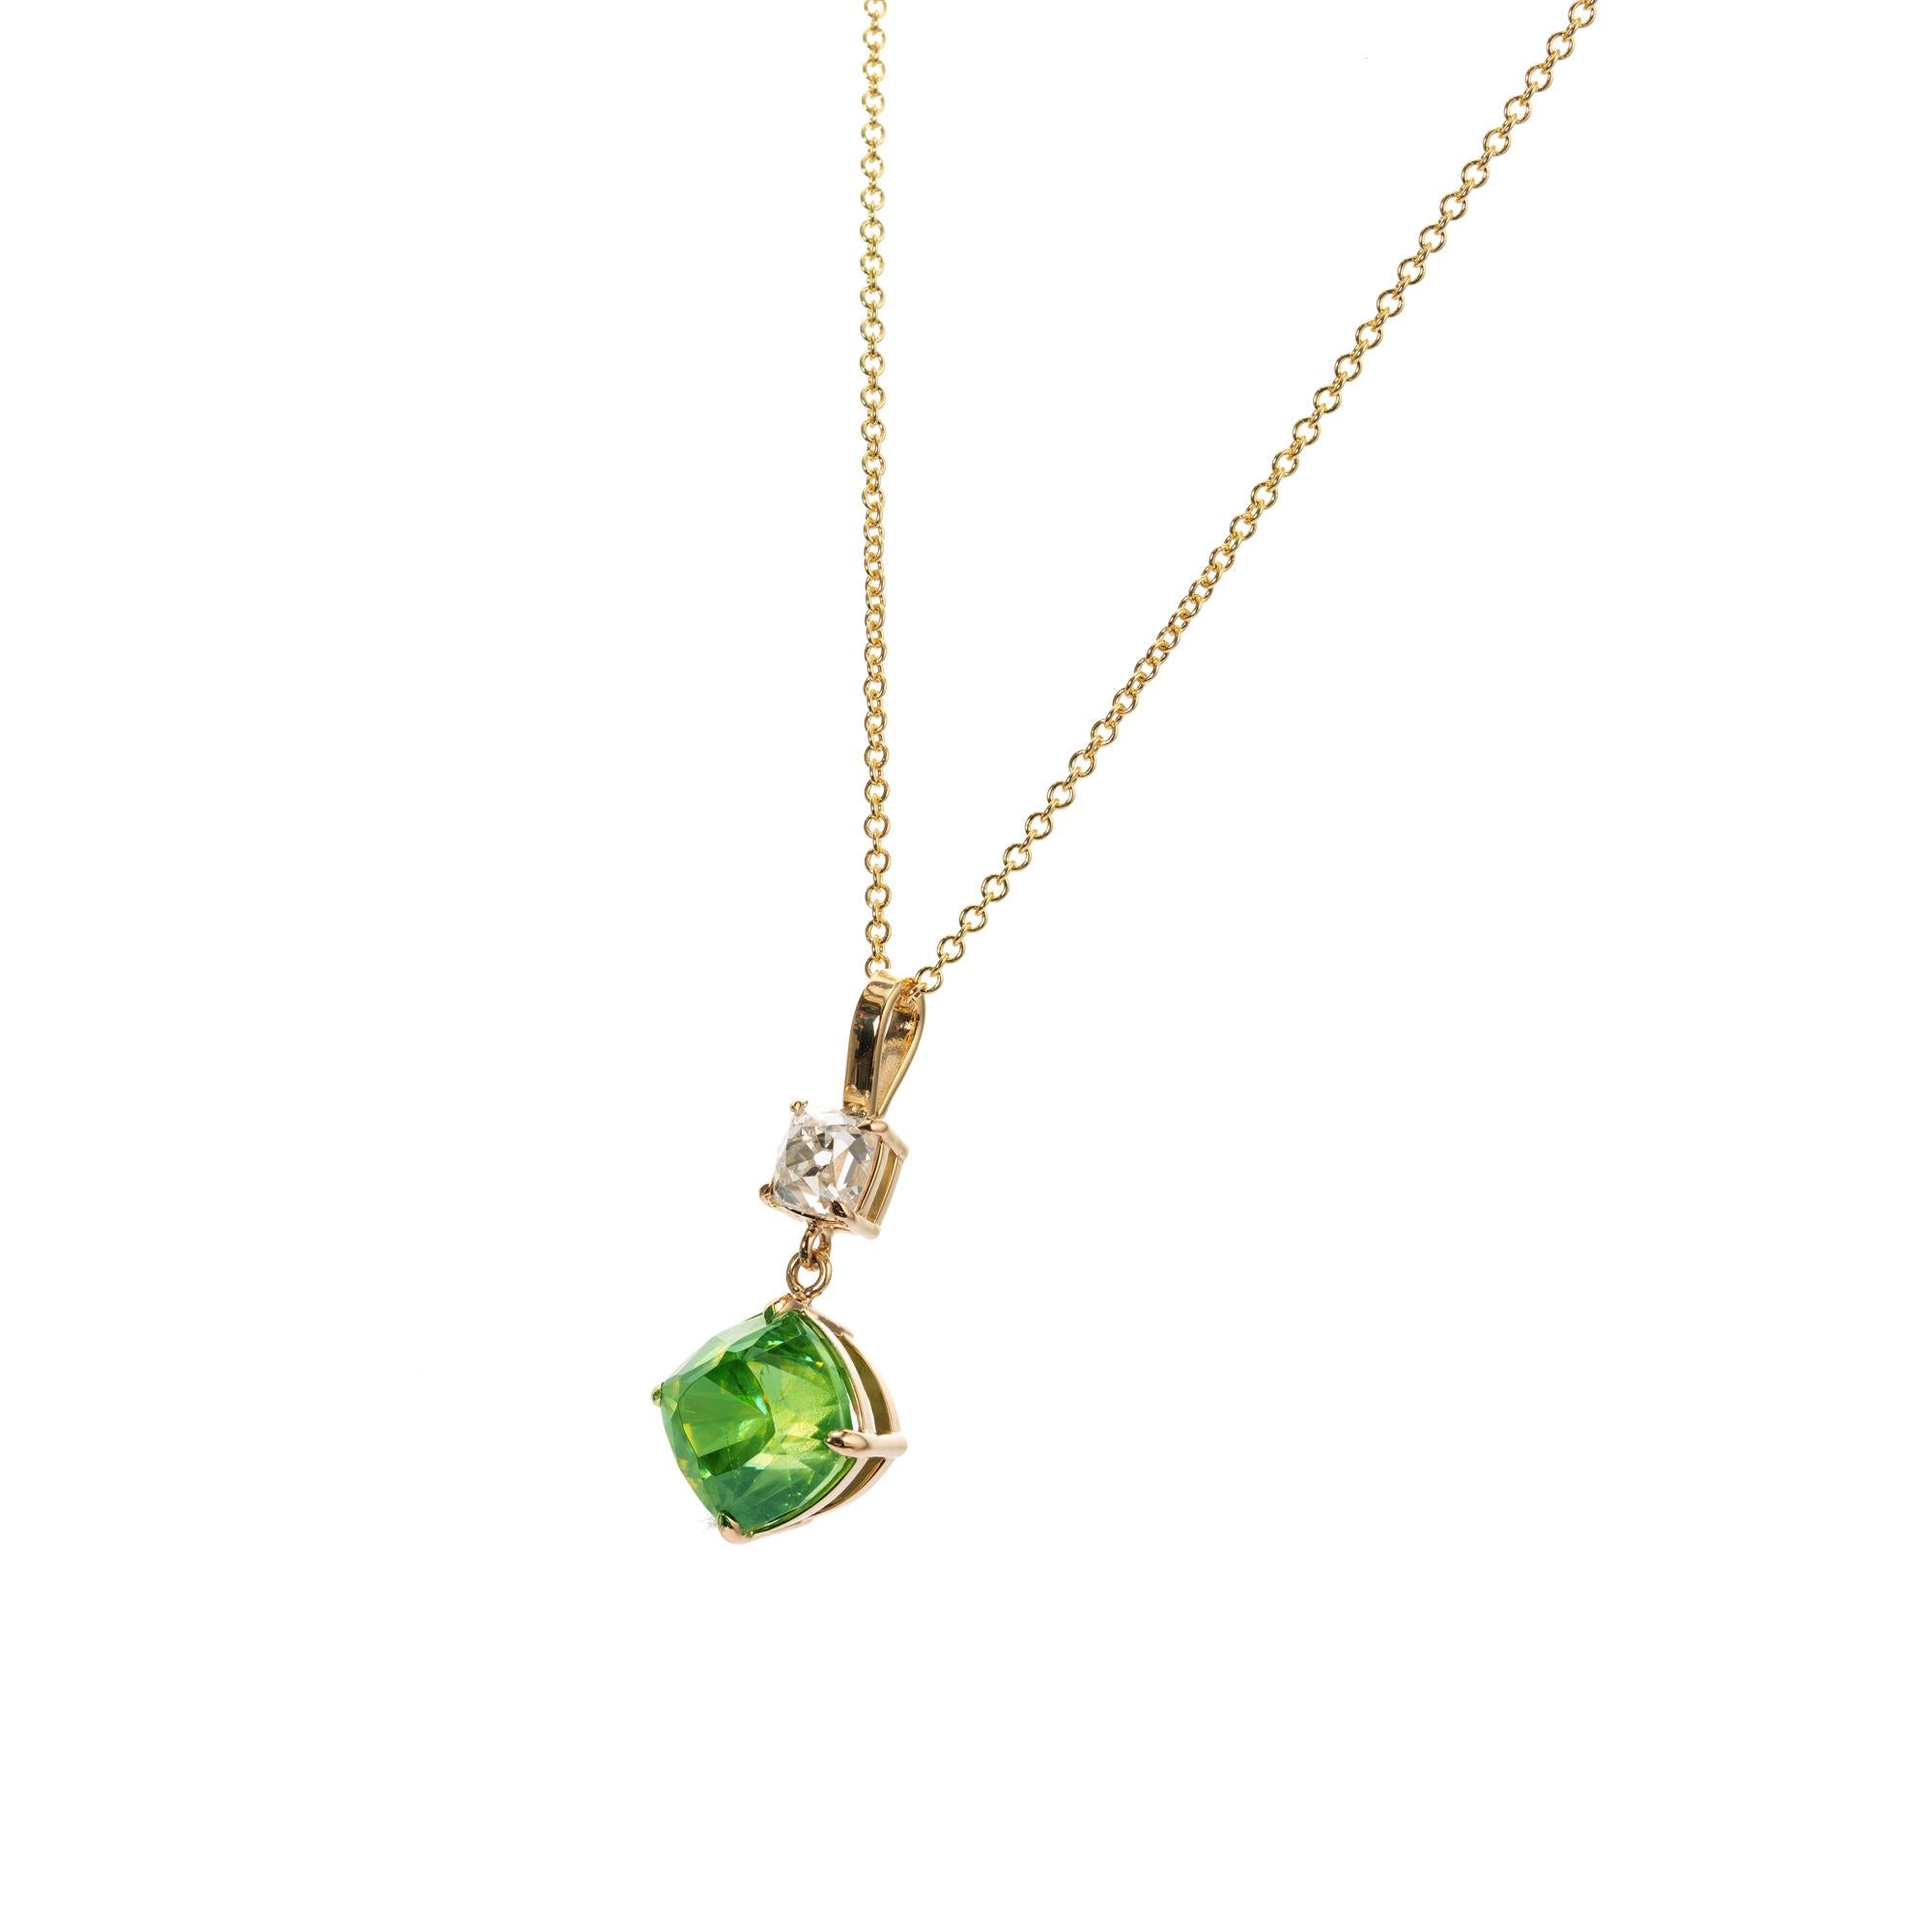 Cushion brilliant cut sphene and diamond pendant necklace. AGL certified center stone with an accent old mine diamond. 18k yellow gold. The stones are from an estate circa 1800’s. The pendant is from the Peter Suchy Workshop. 

1 cushion cut green